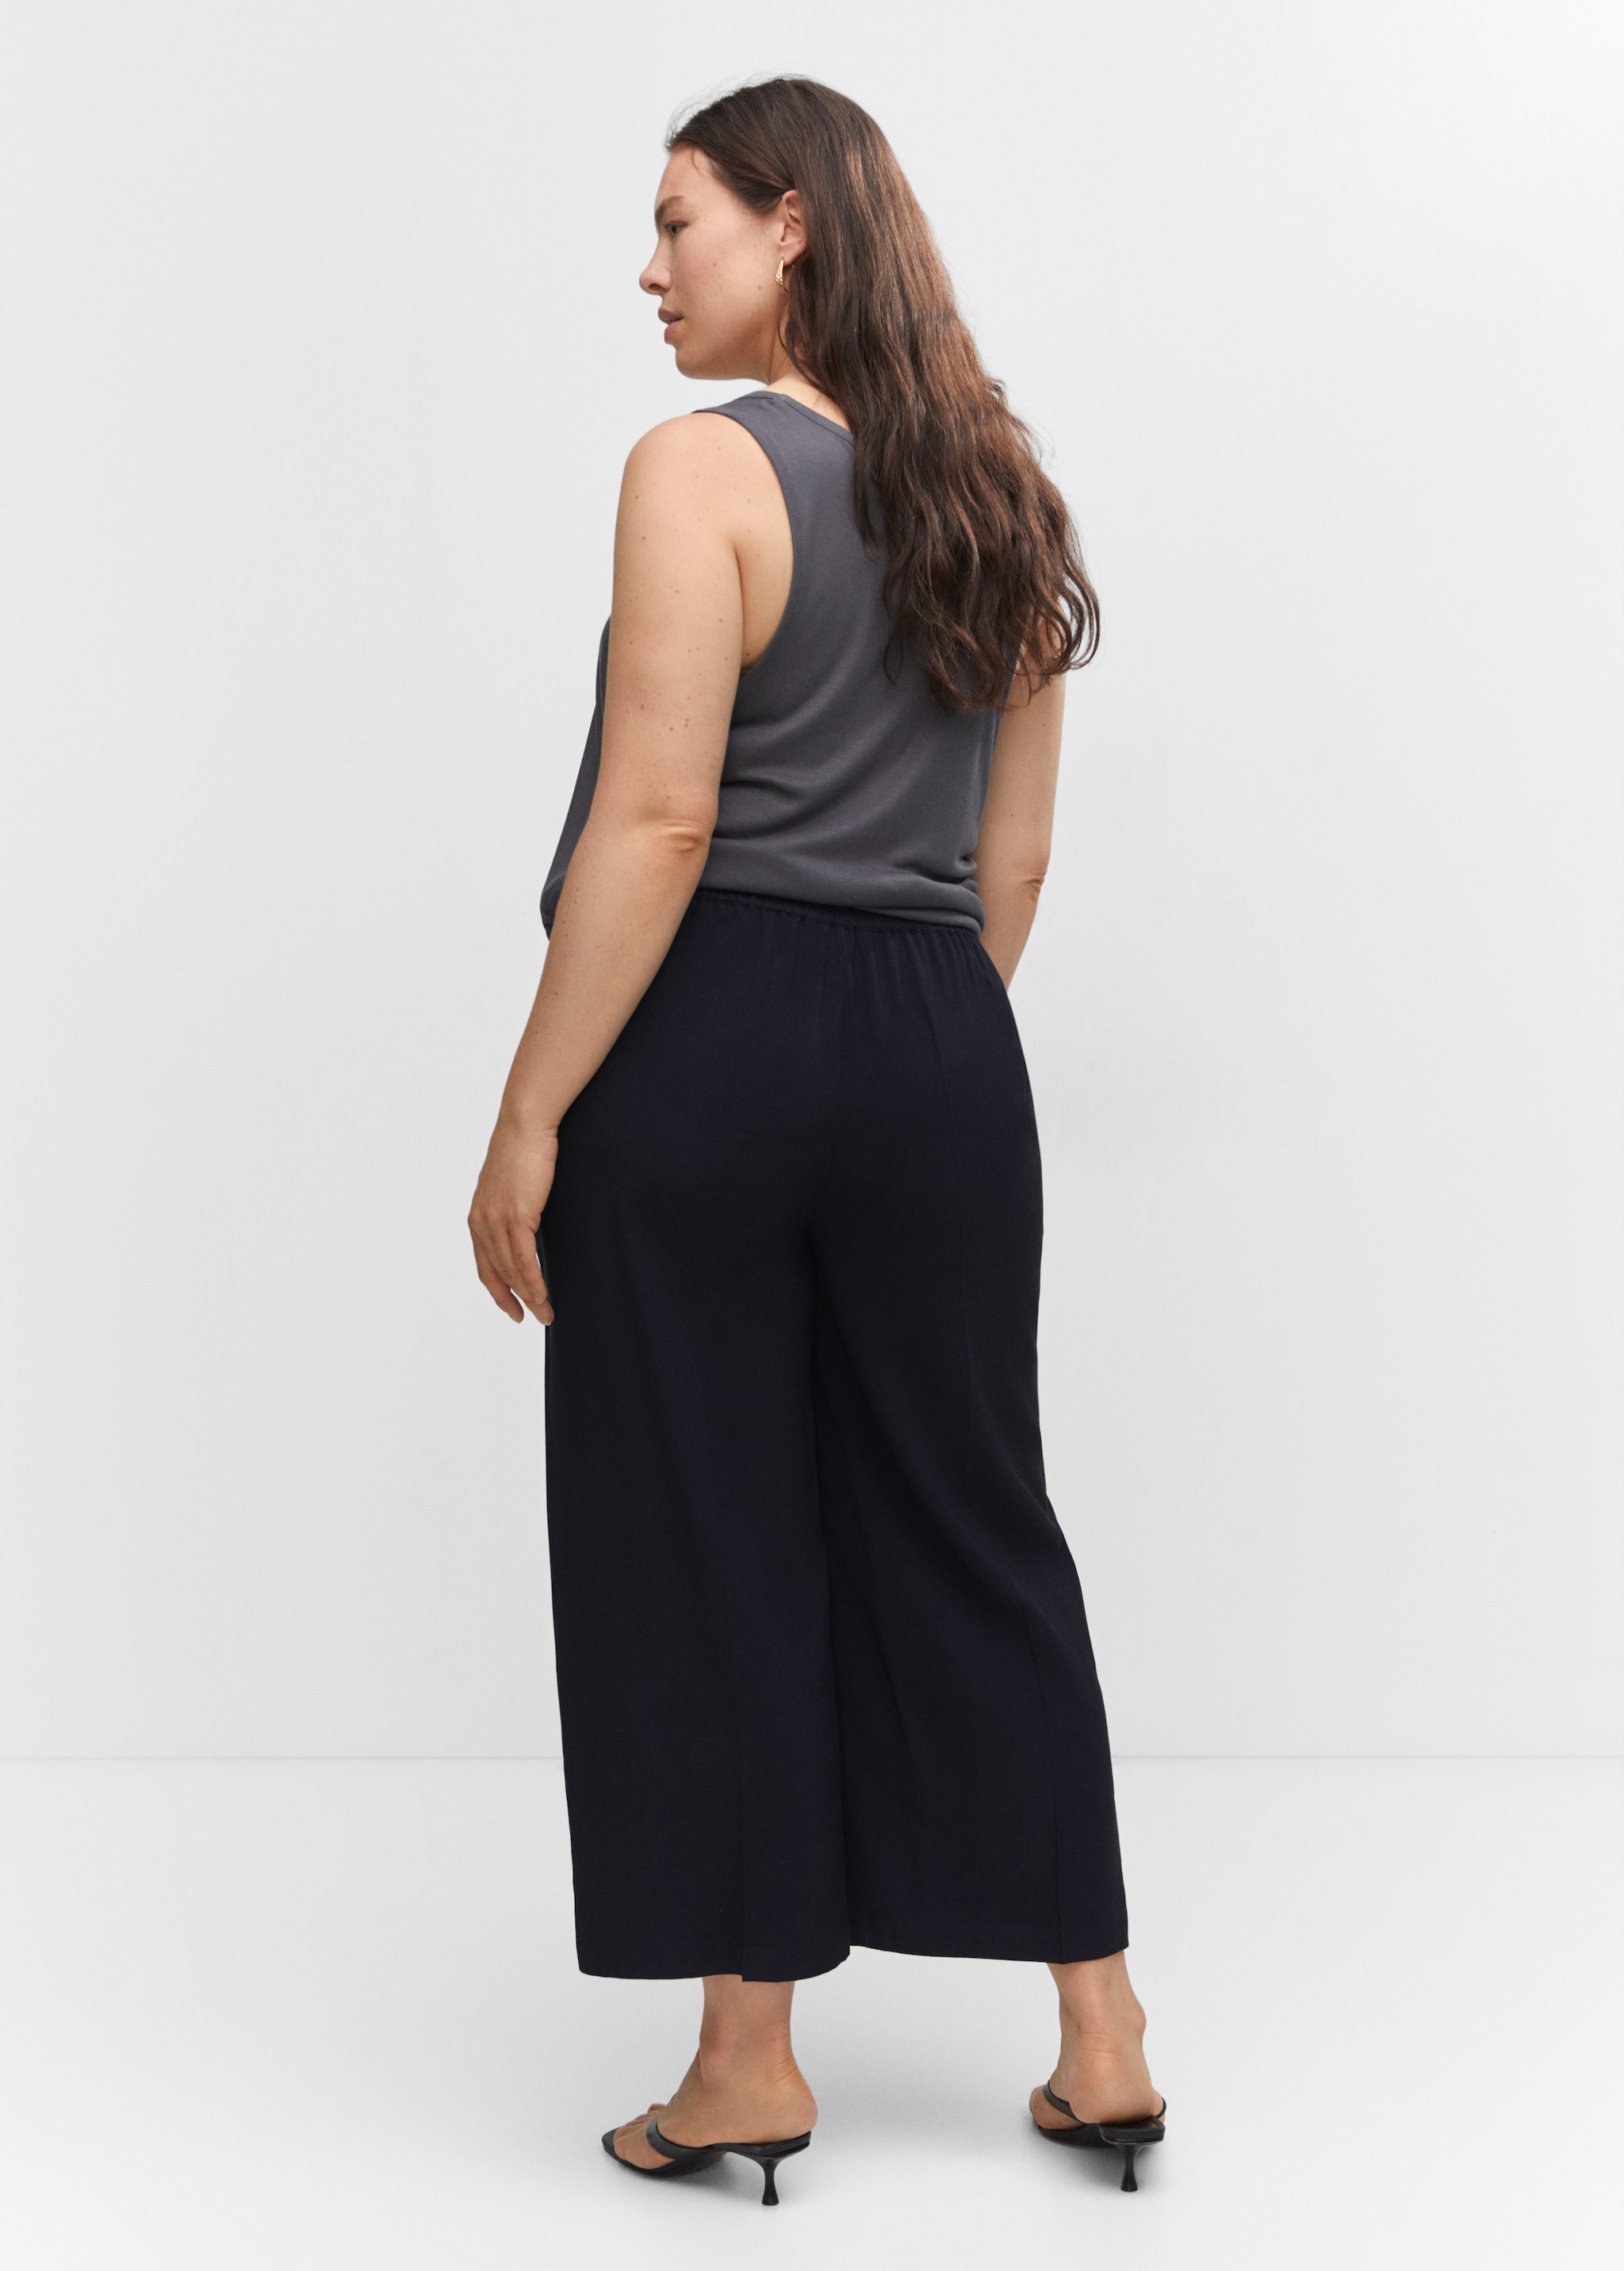 High-waist palazzo pants - Details of the article 4